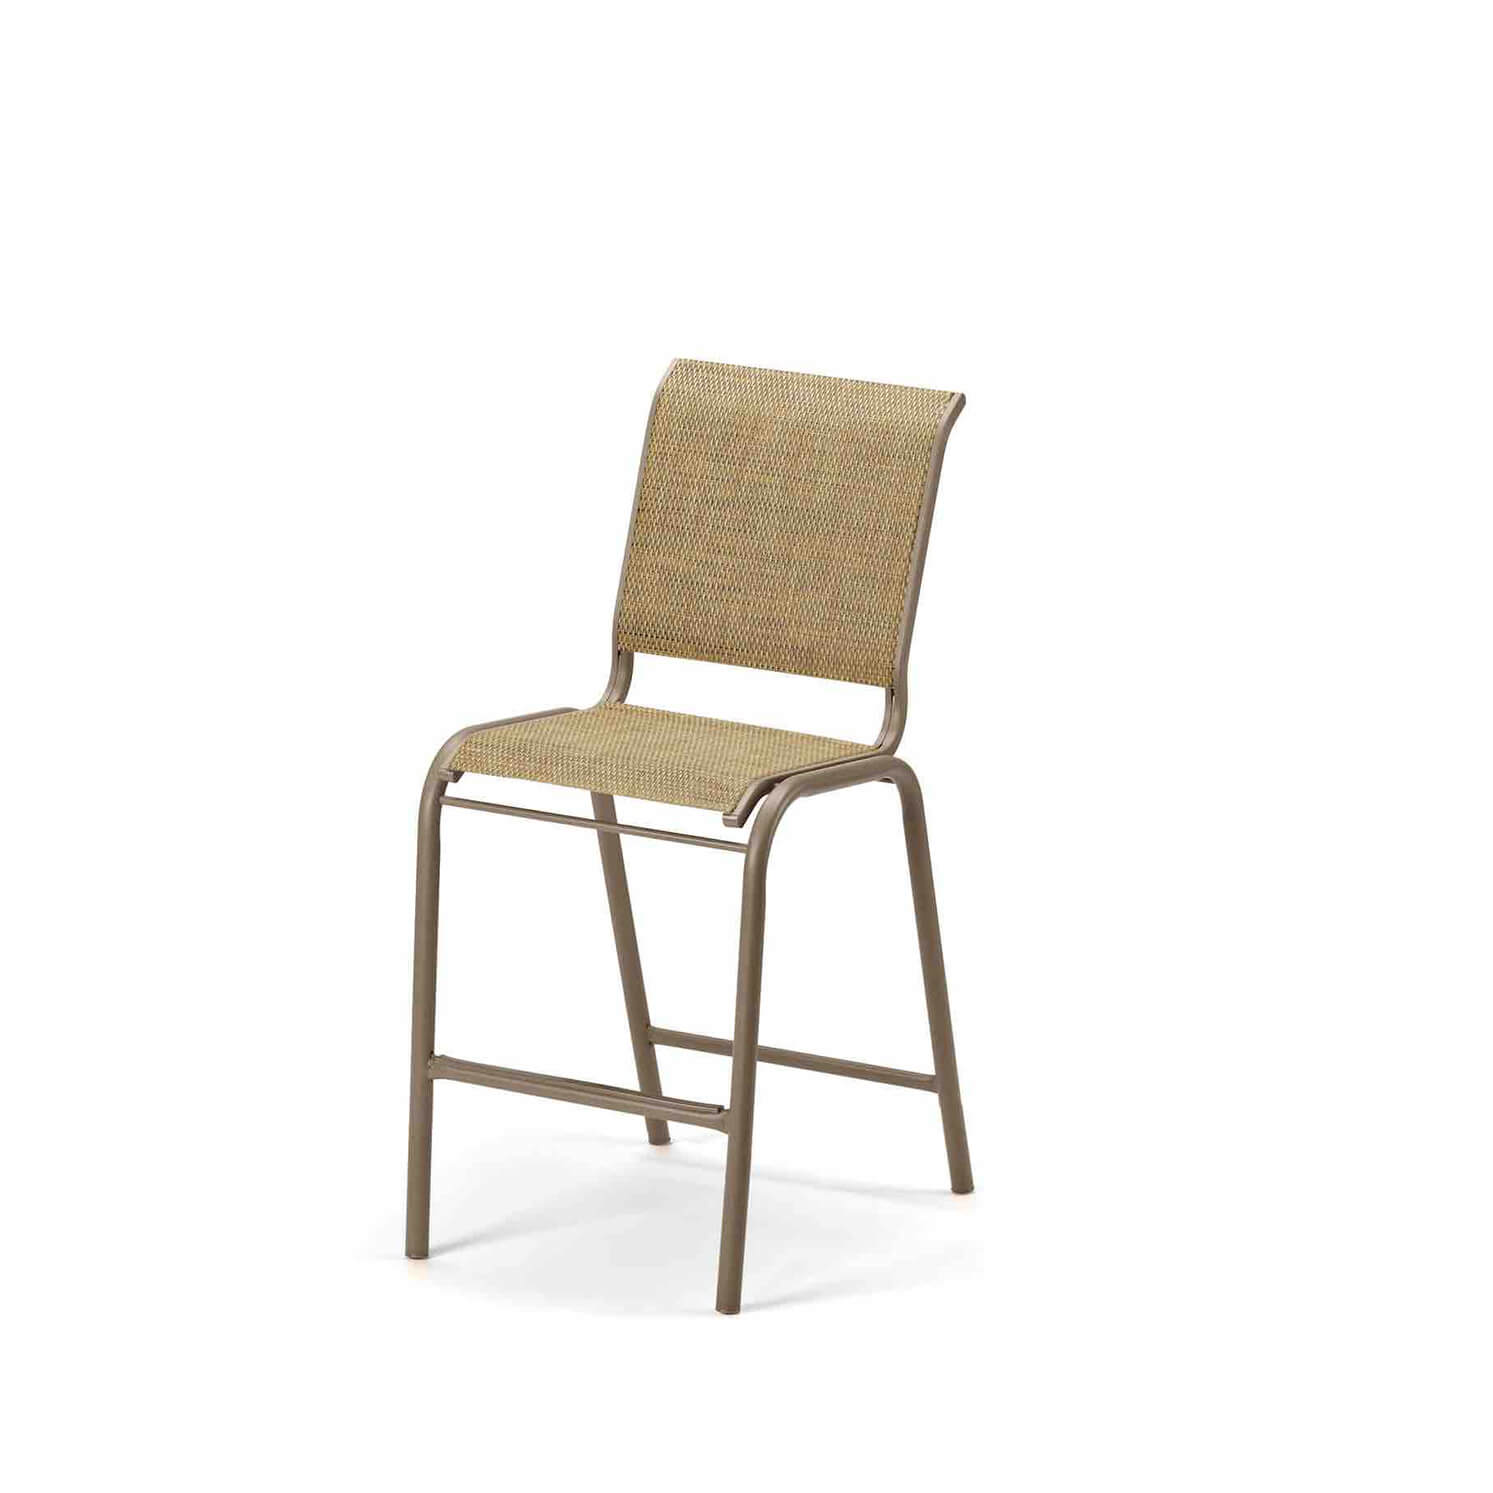 Reliance Balcony Height Stacking Armless Cafe Chair